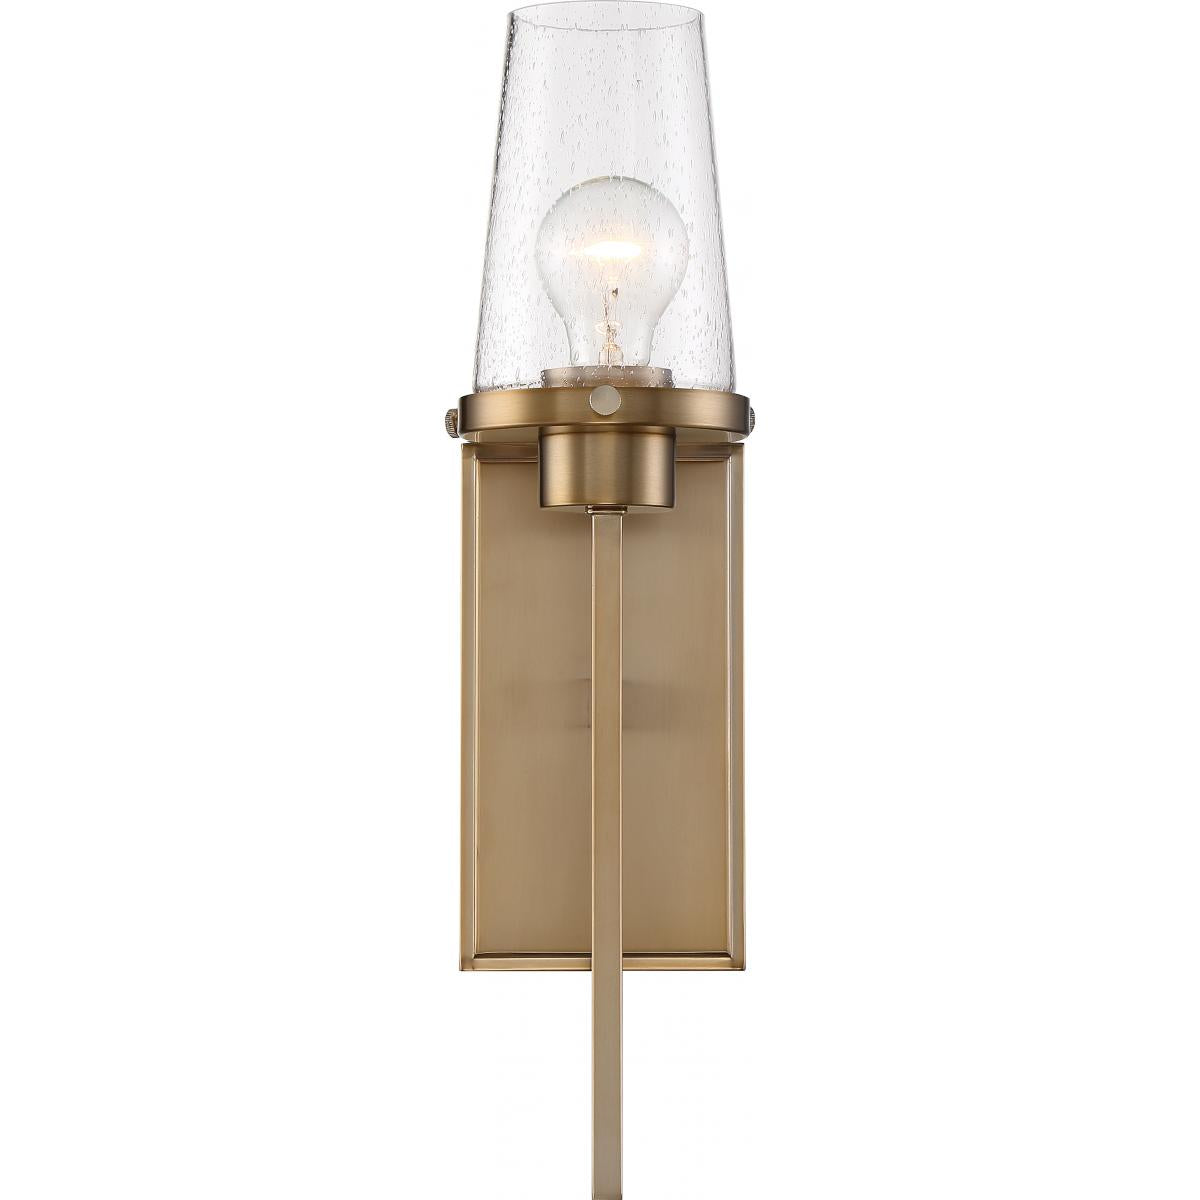 Rector- 1 Light Wall Sconce with Clear Glass - Burnished Brass Finish